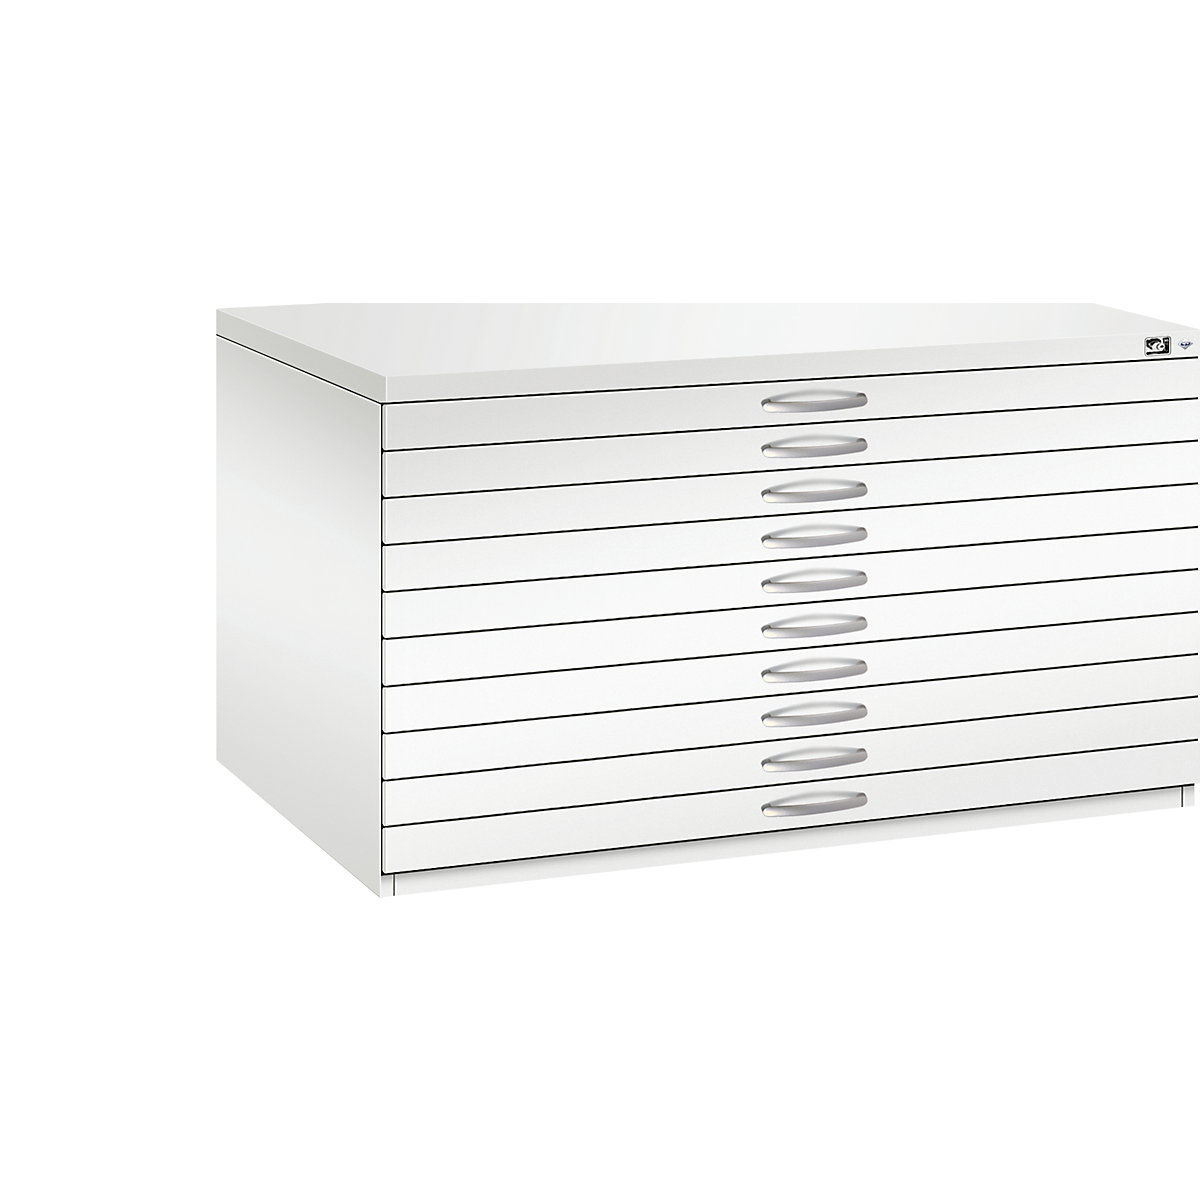 Drawing cabinet – C+P, A0, 10 drawers, height 760 mm, traffic white-16